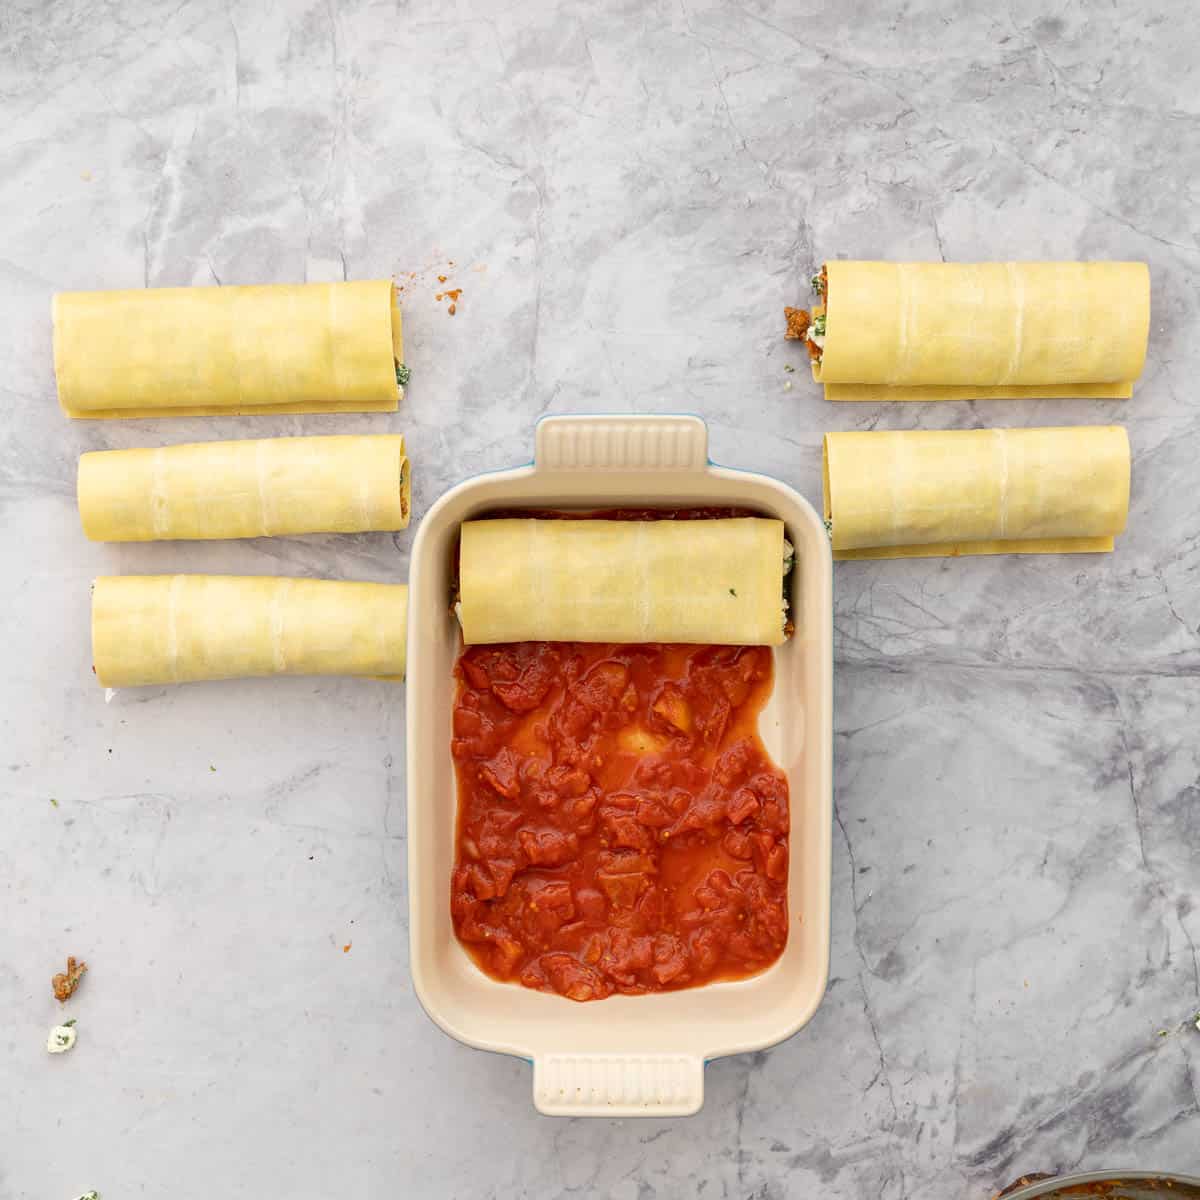 Rolled up pasta sheets next to a dish which has a layer of diced tomatoes in the bottom and one lasagna roll up placed in the on top 